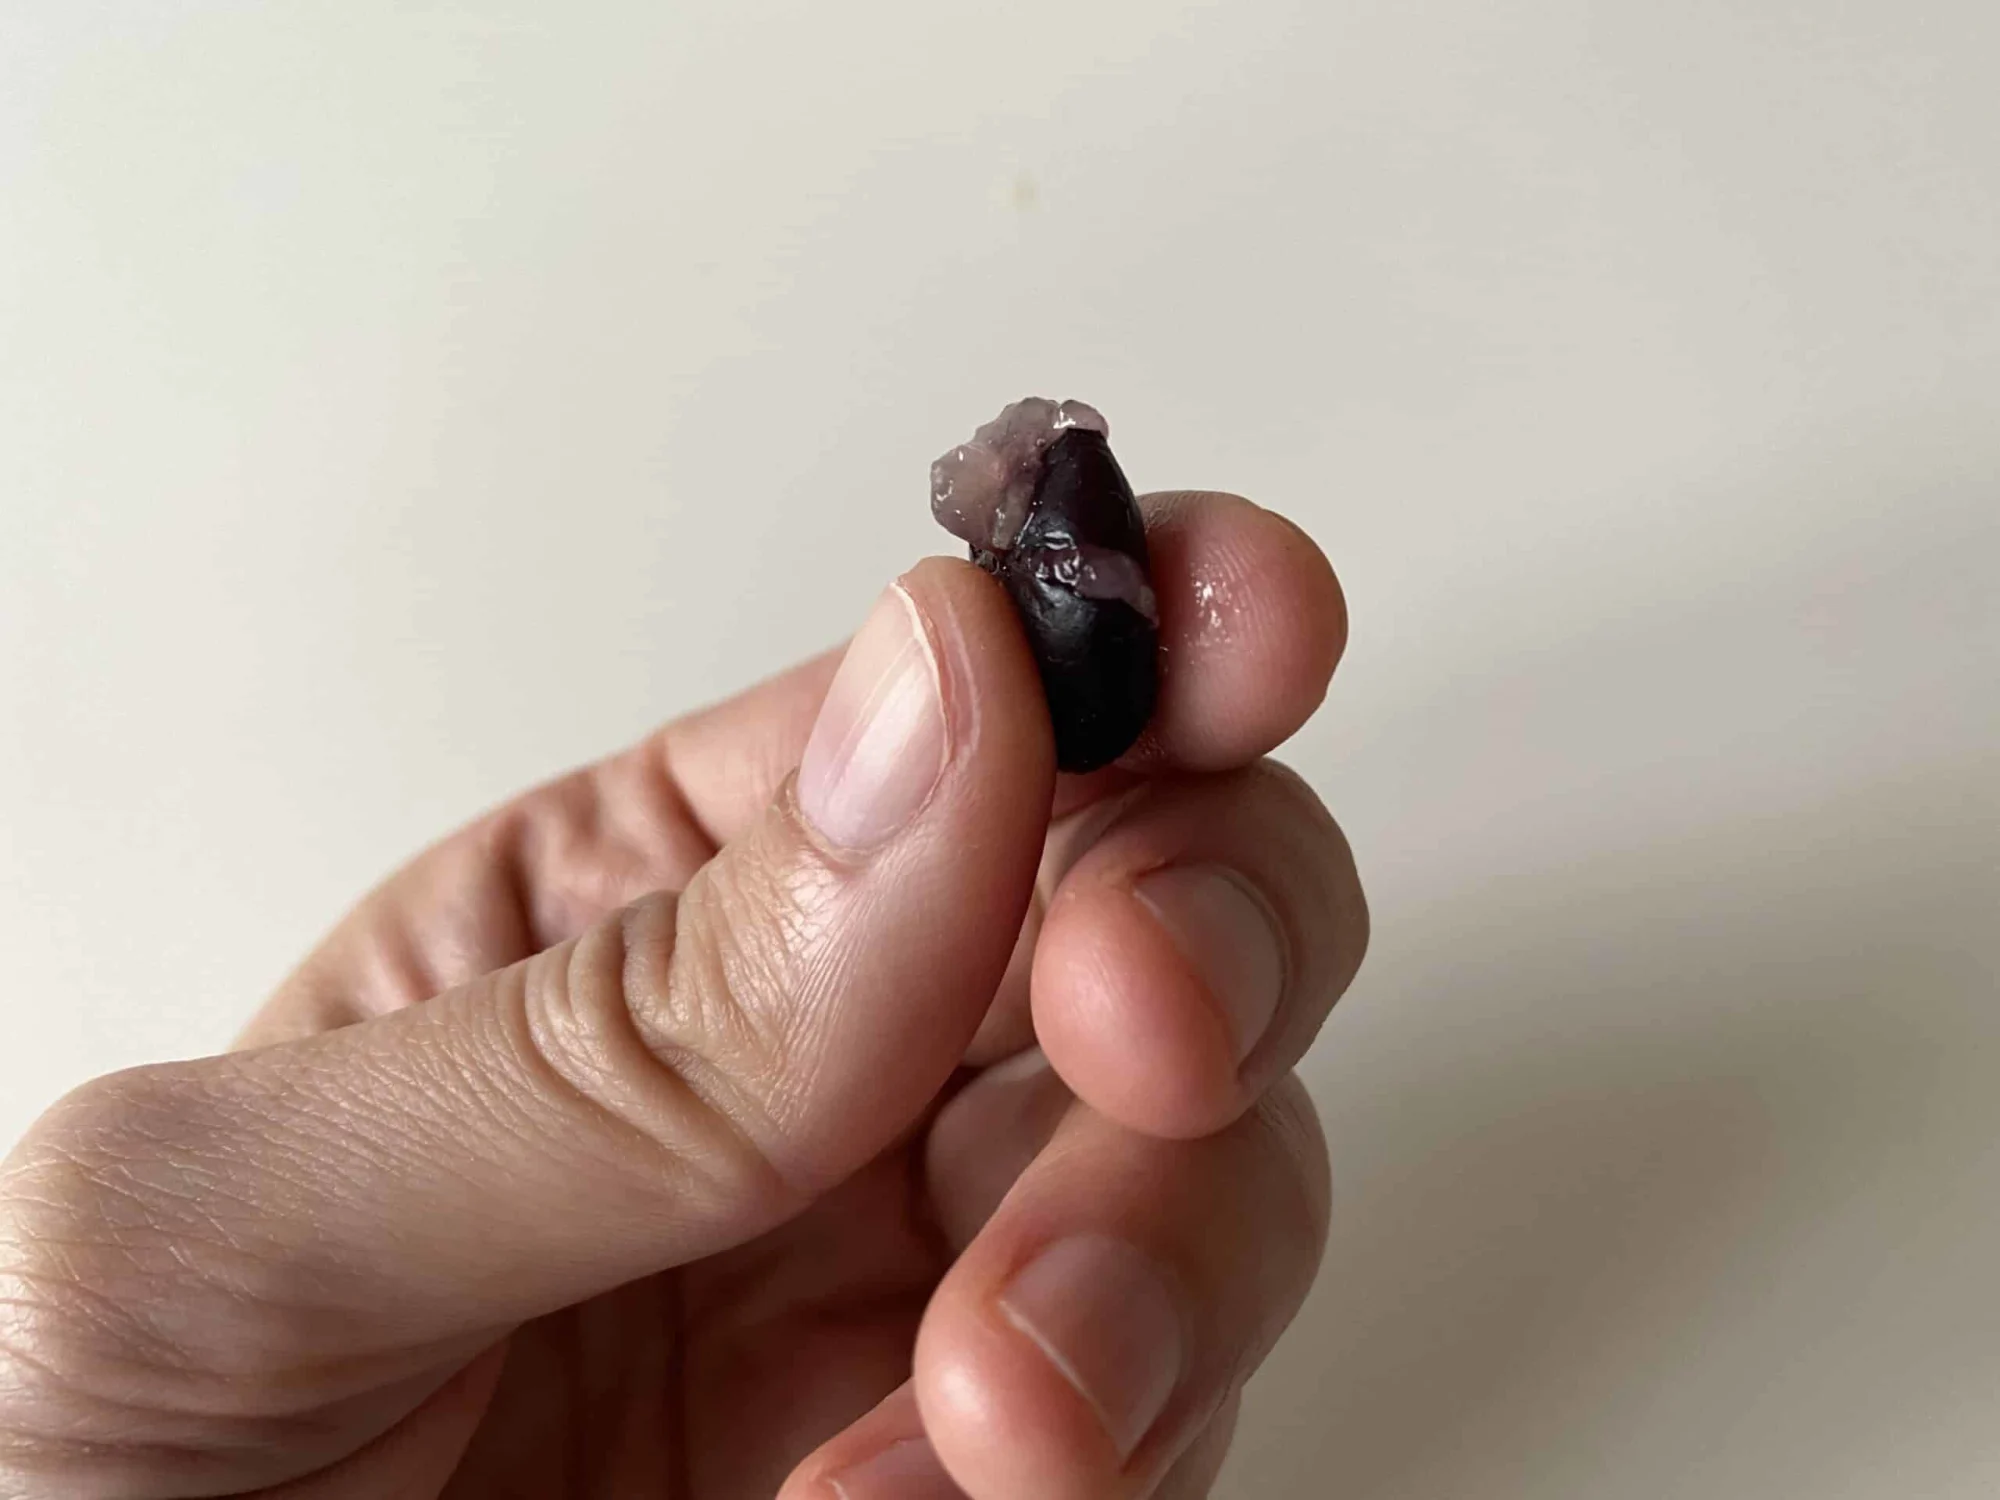 blueberry being squeezed between an index finger and thumb in order to flatten it